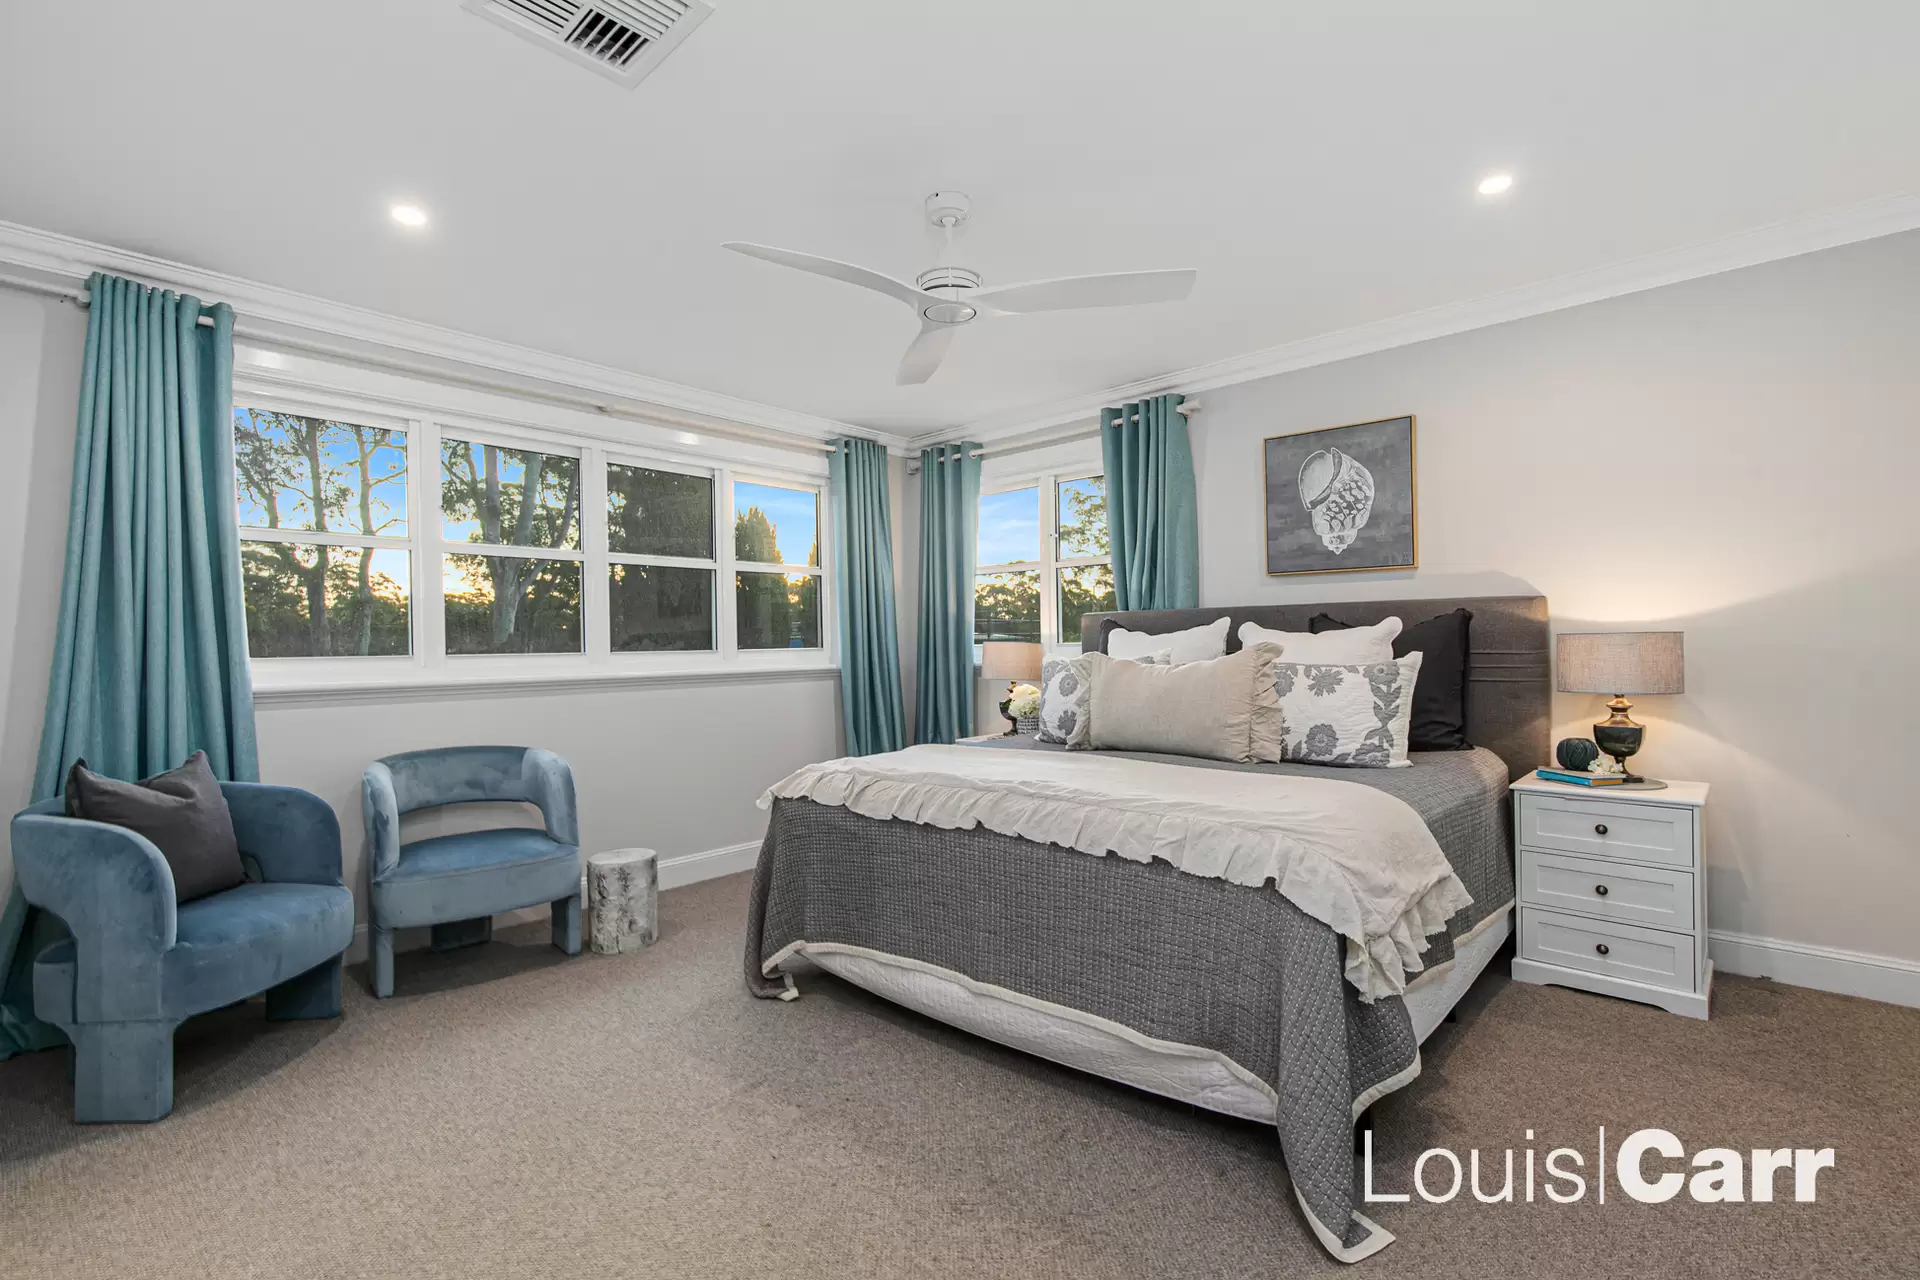 Photo #8: 59 Loftus Road, Pennant Hills - Auction by Louis Carr Real Estate